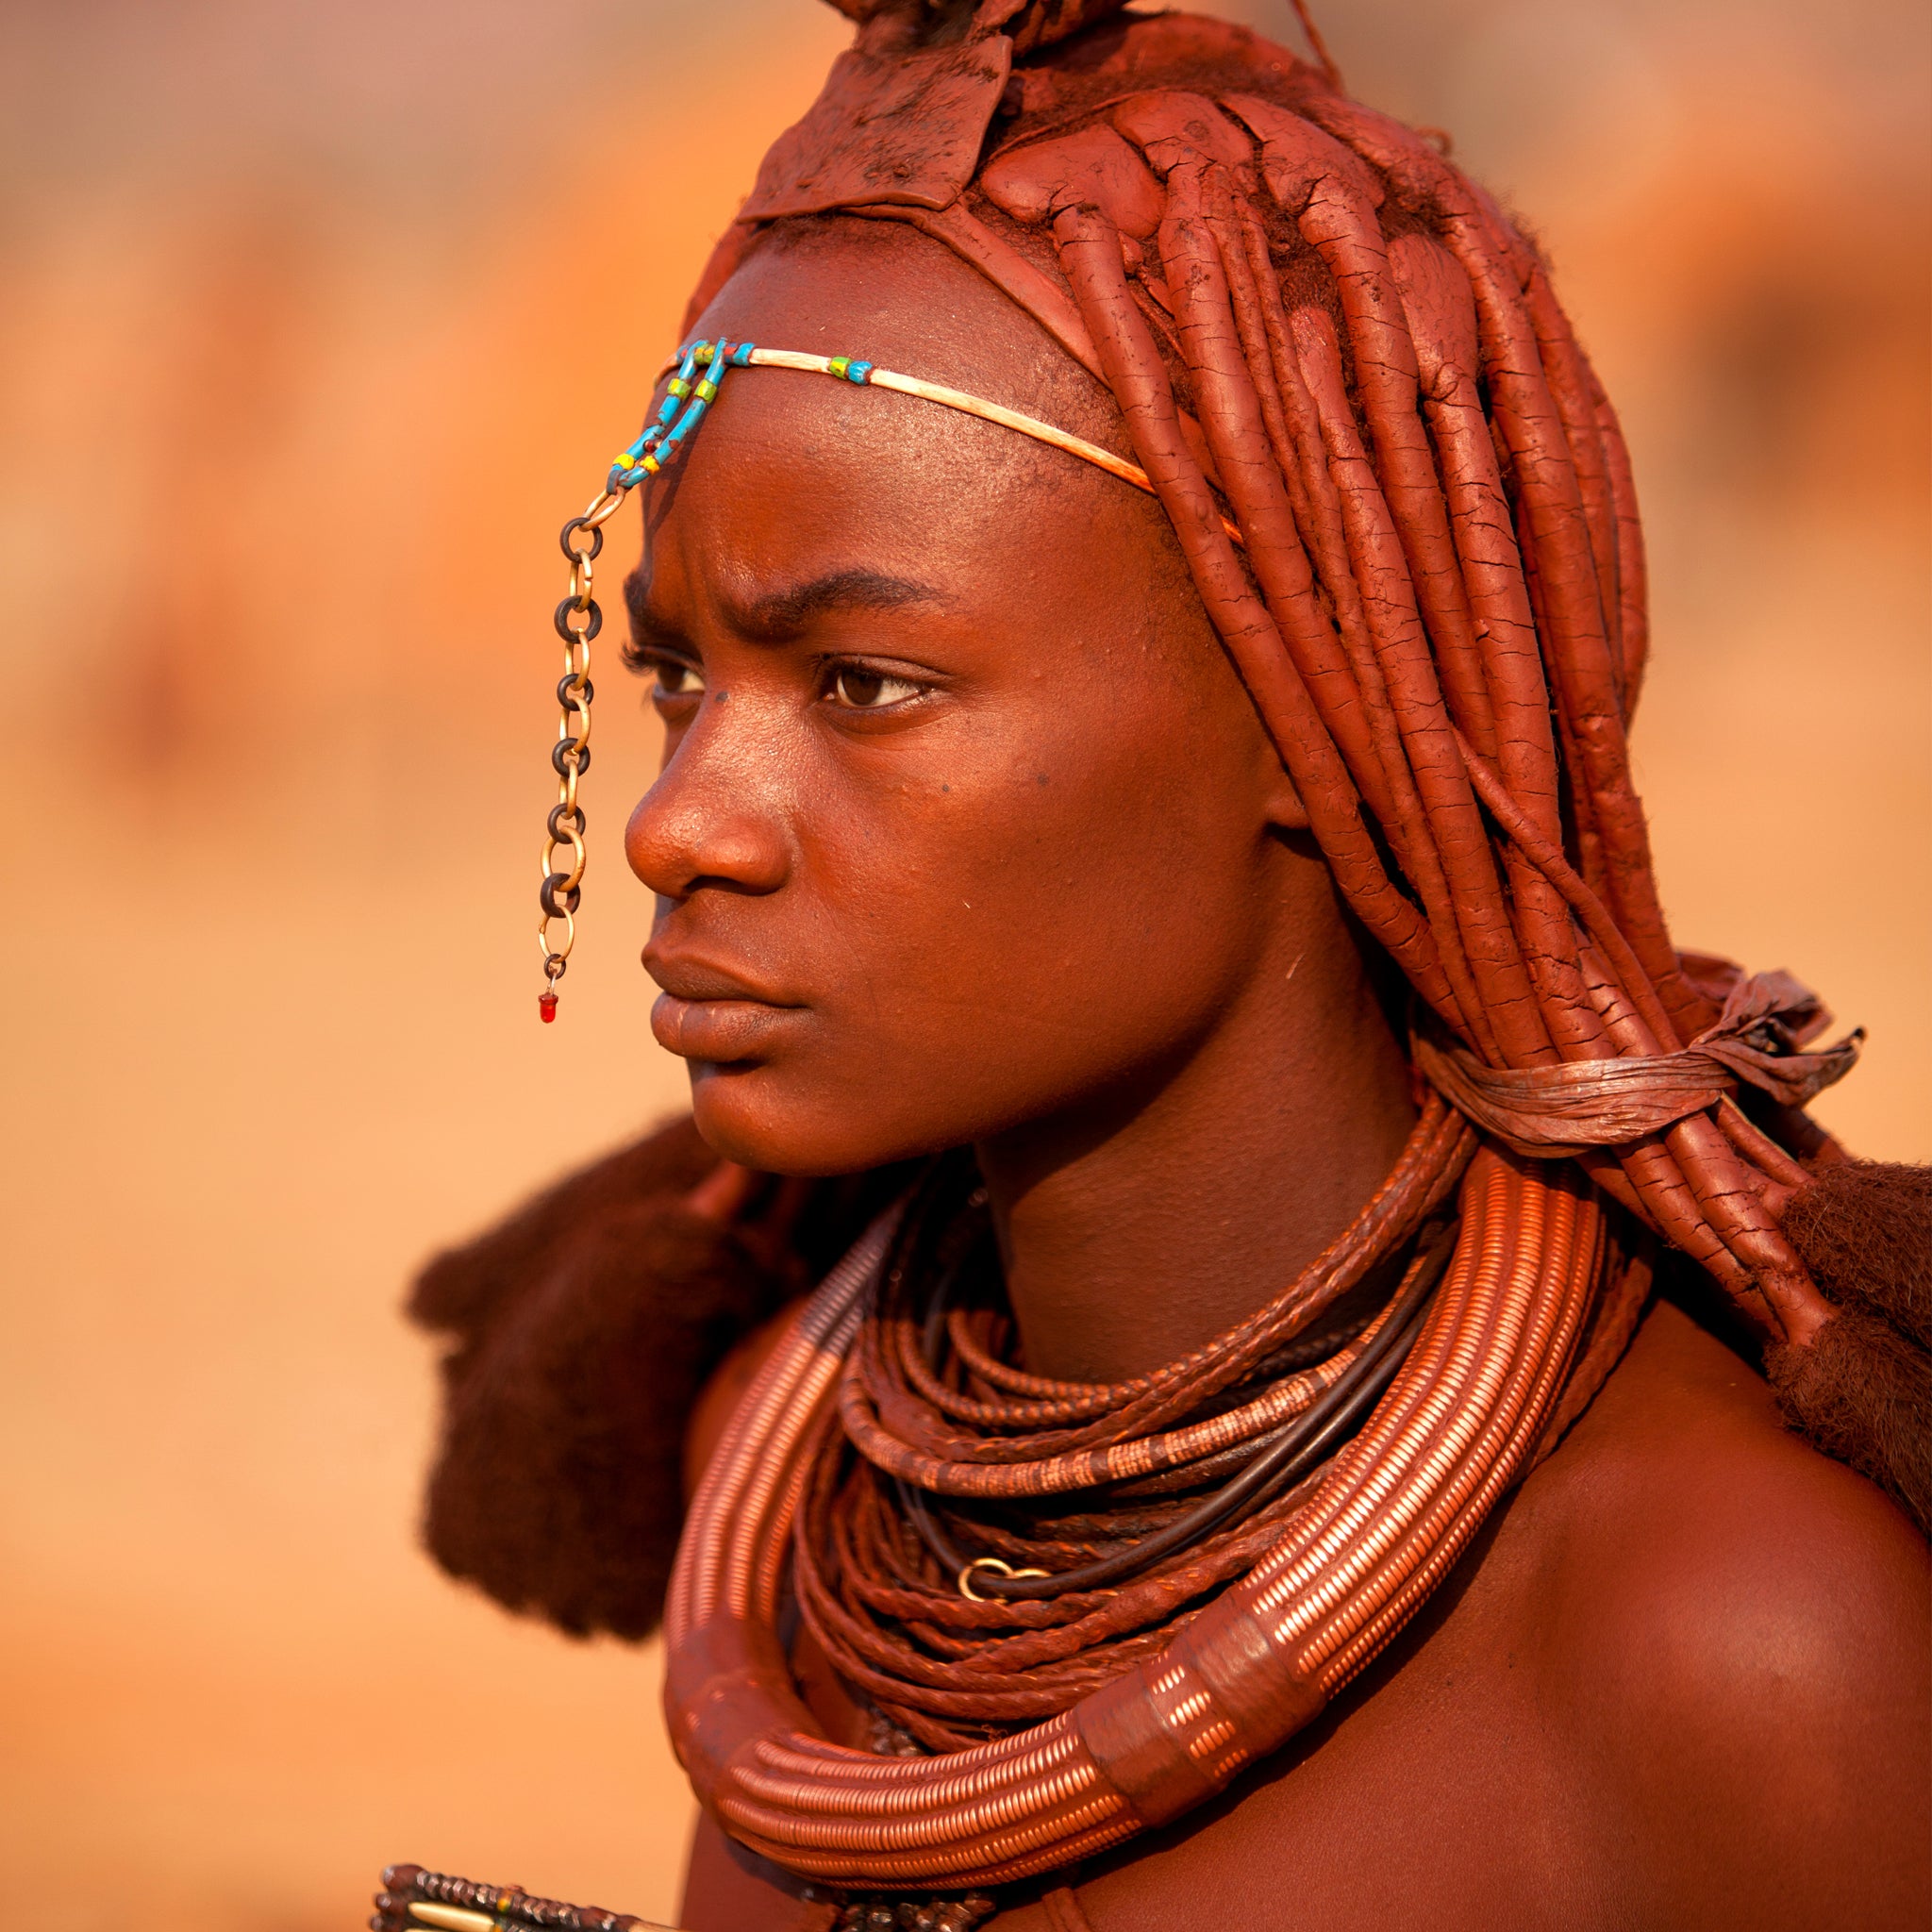 Smiling Himba girl with traditional jewelry